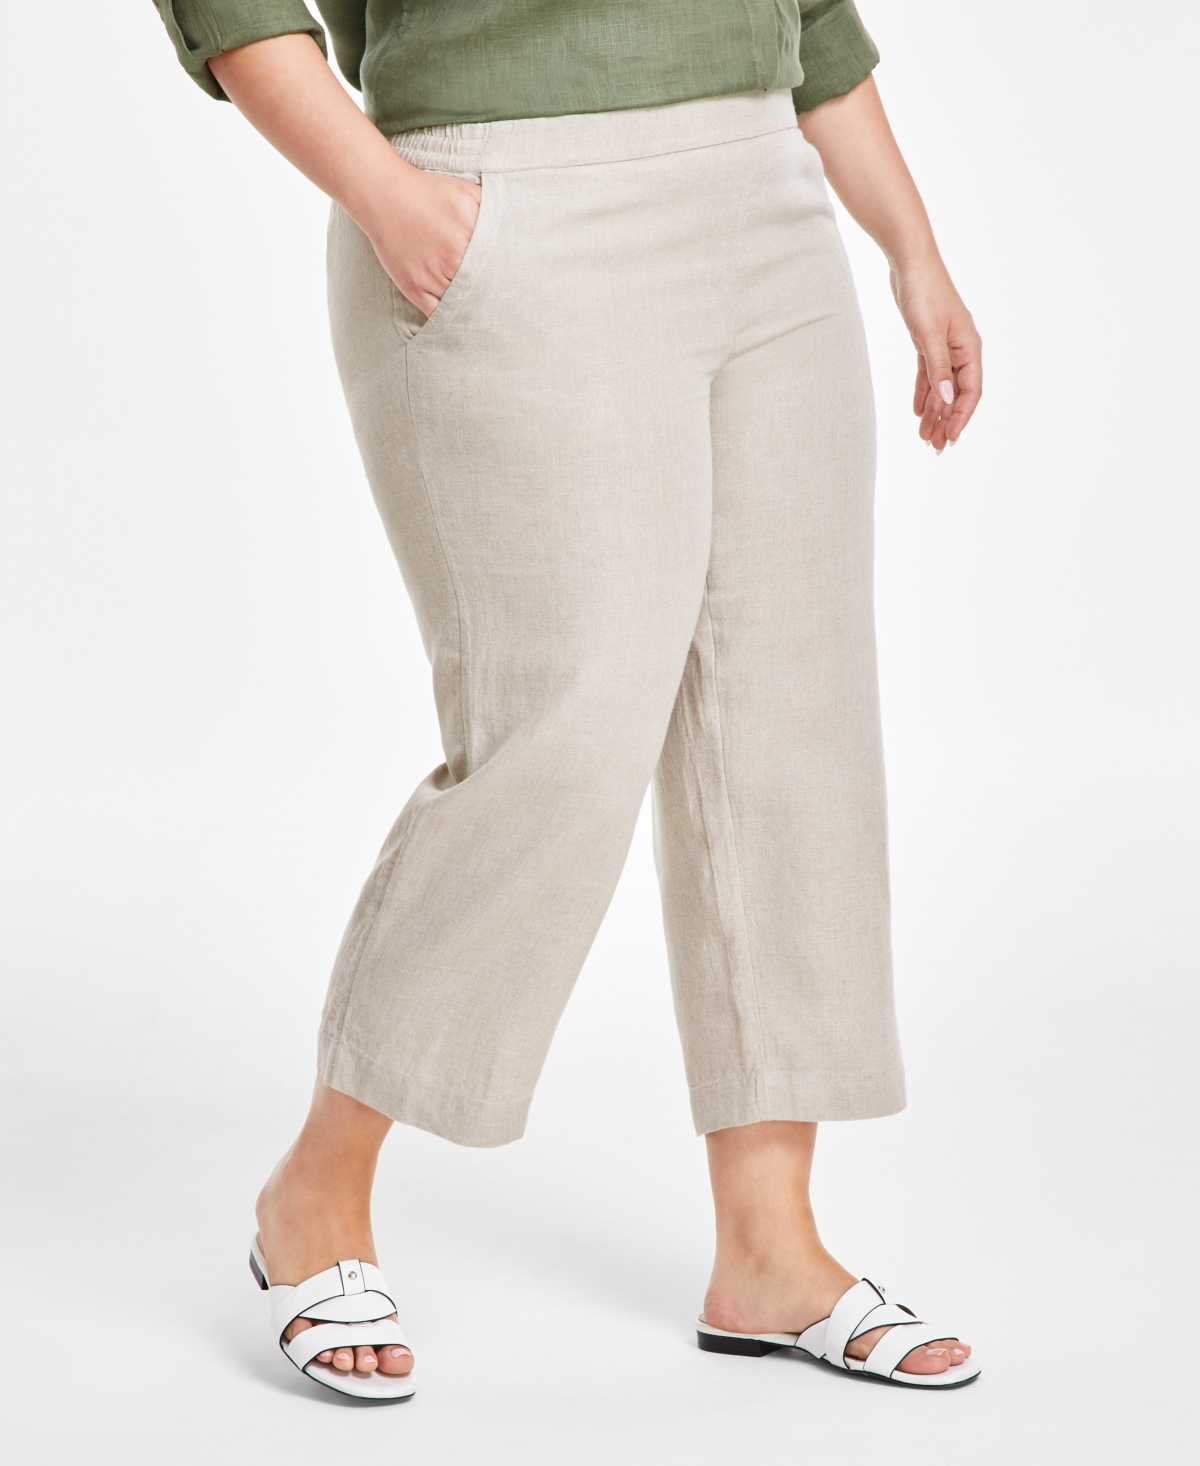 Plus Size 100% Linen Cropped Pants, Created for Macy's - Flax